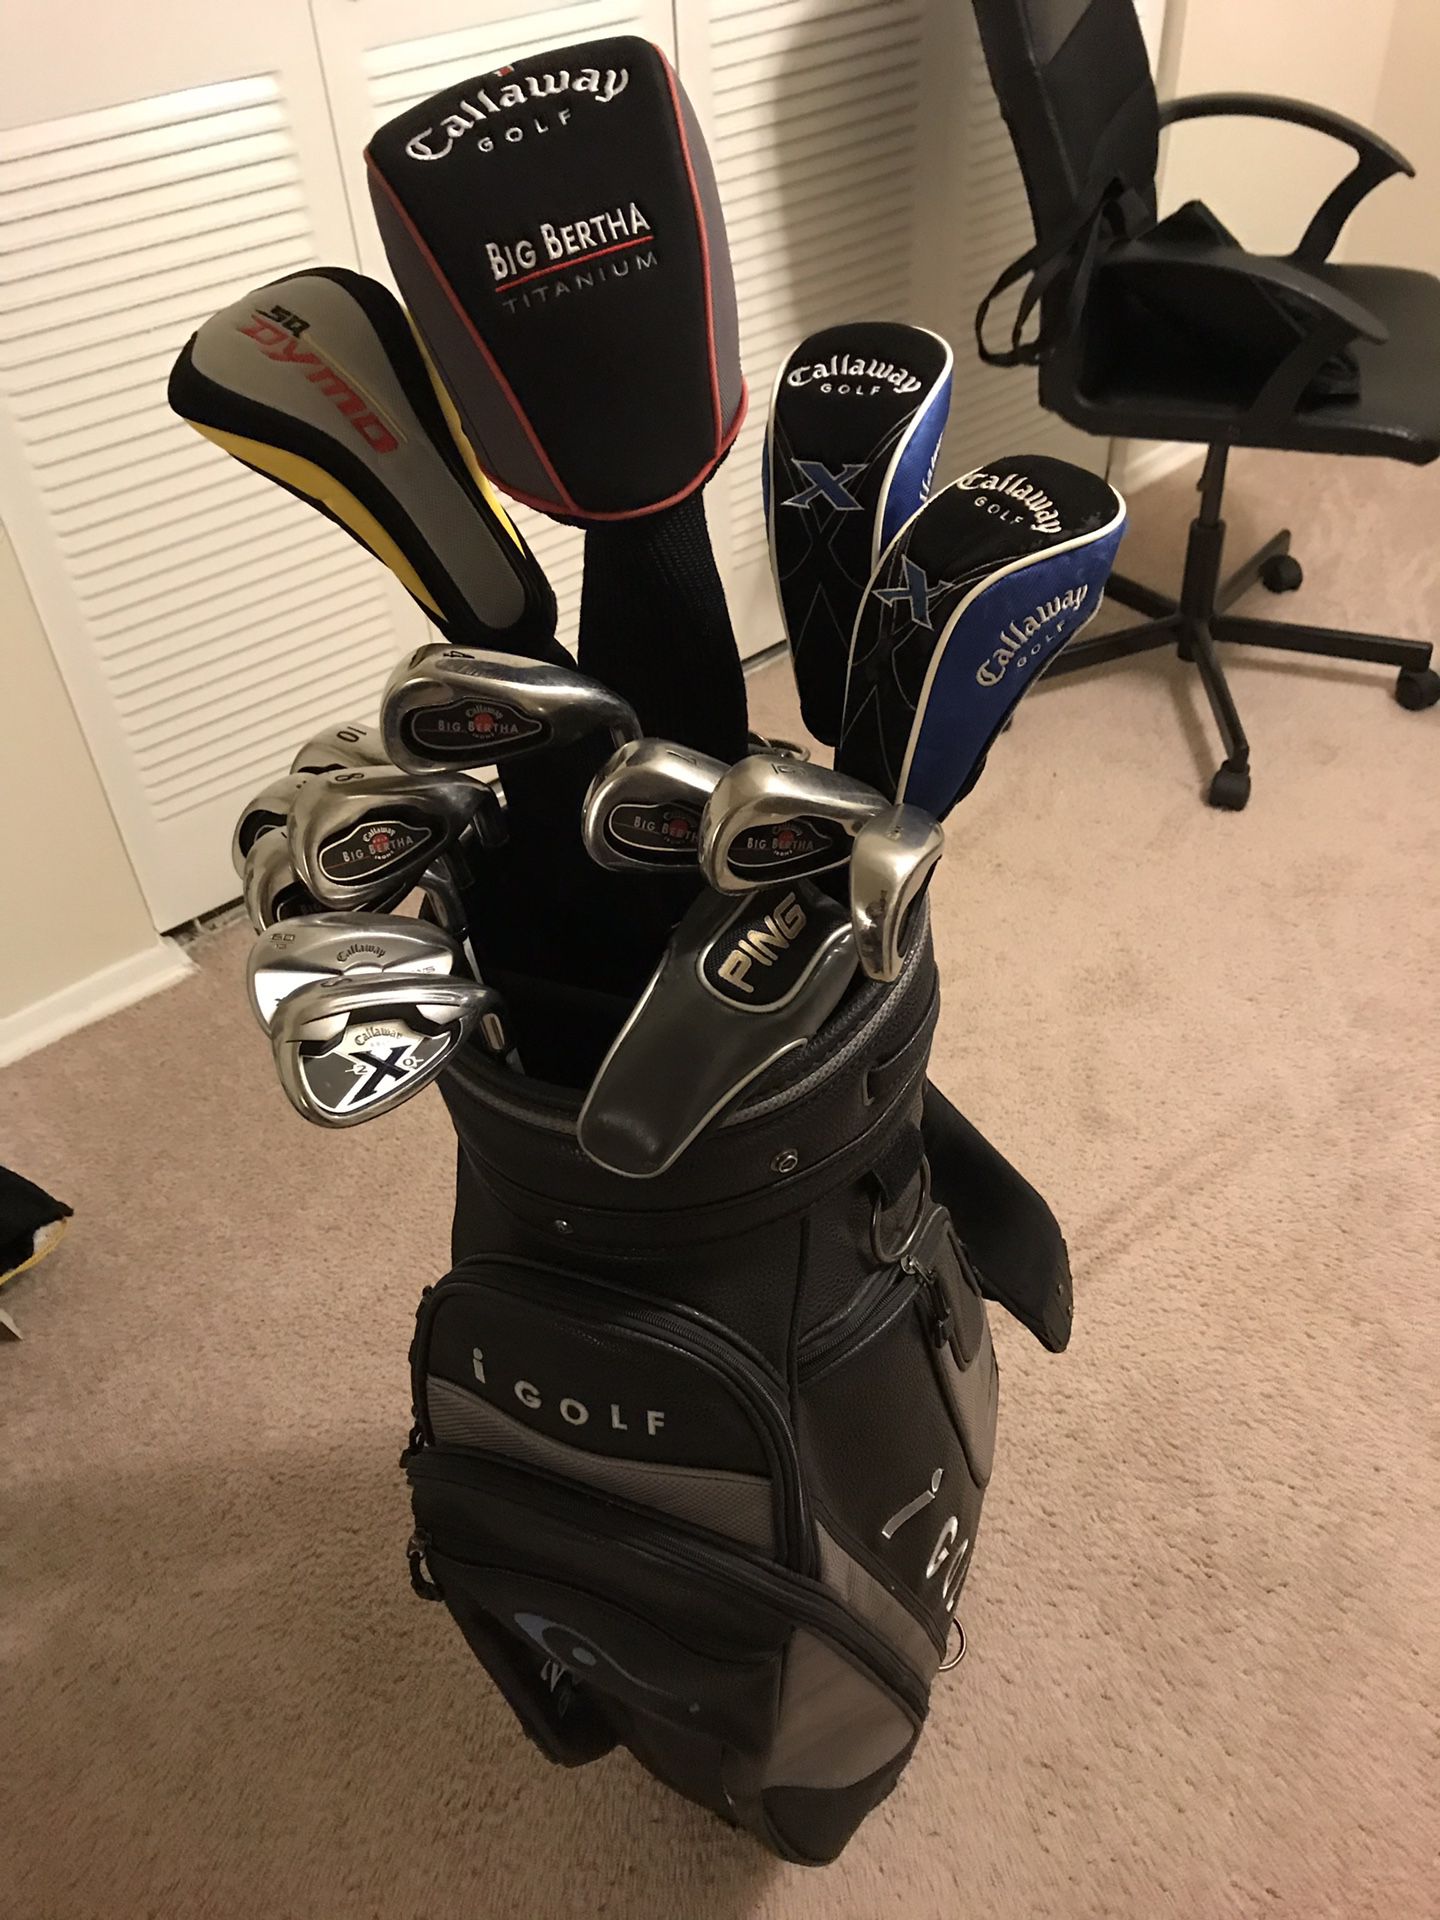 Callaway golf clubs, golf bag and travel bag. $400 or best offer